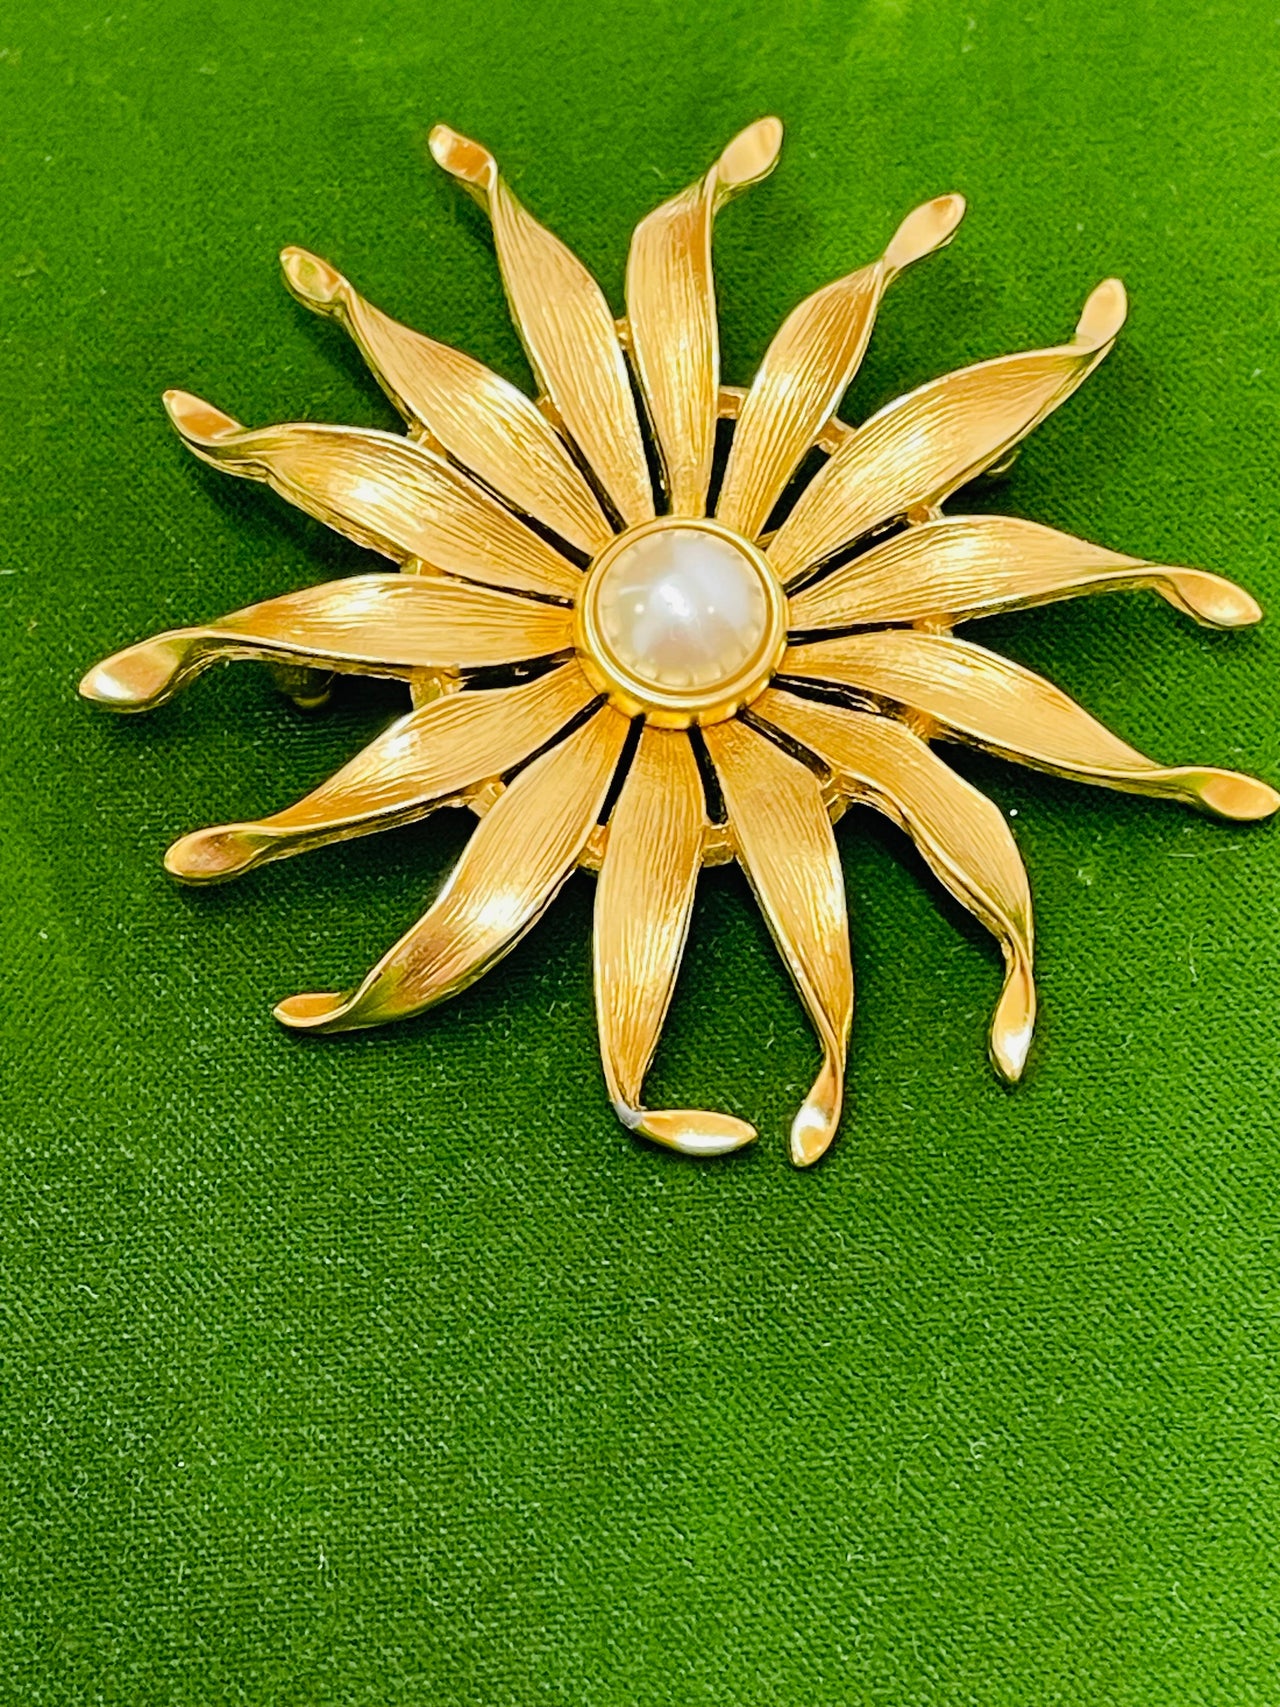 Large Gold Sun Brooch with Pearl Center Devil's Details 